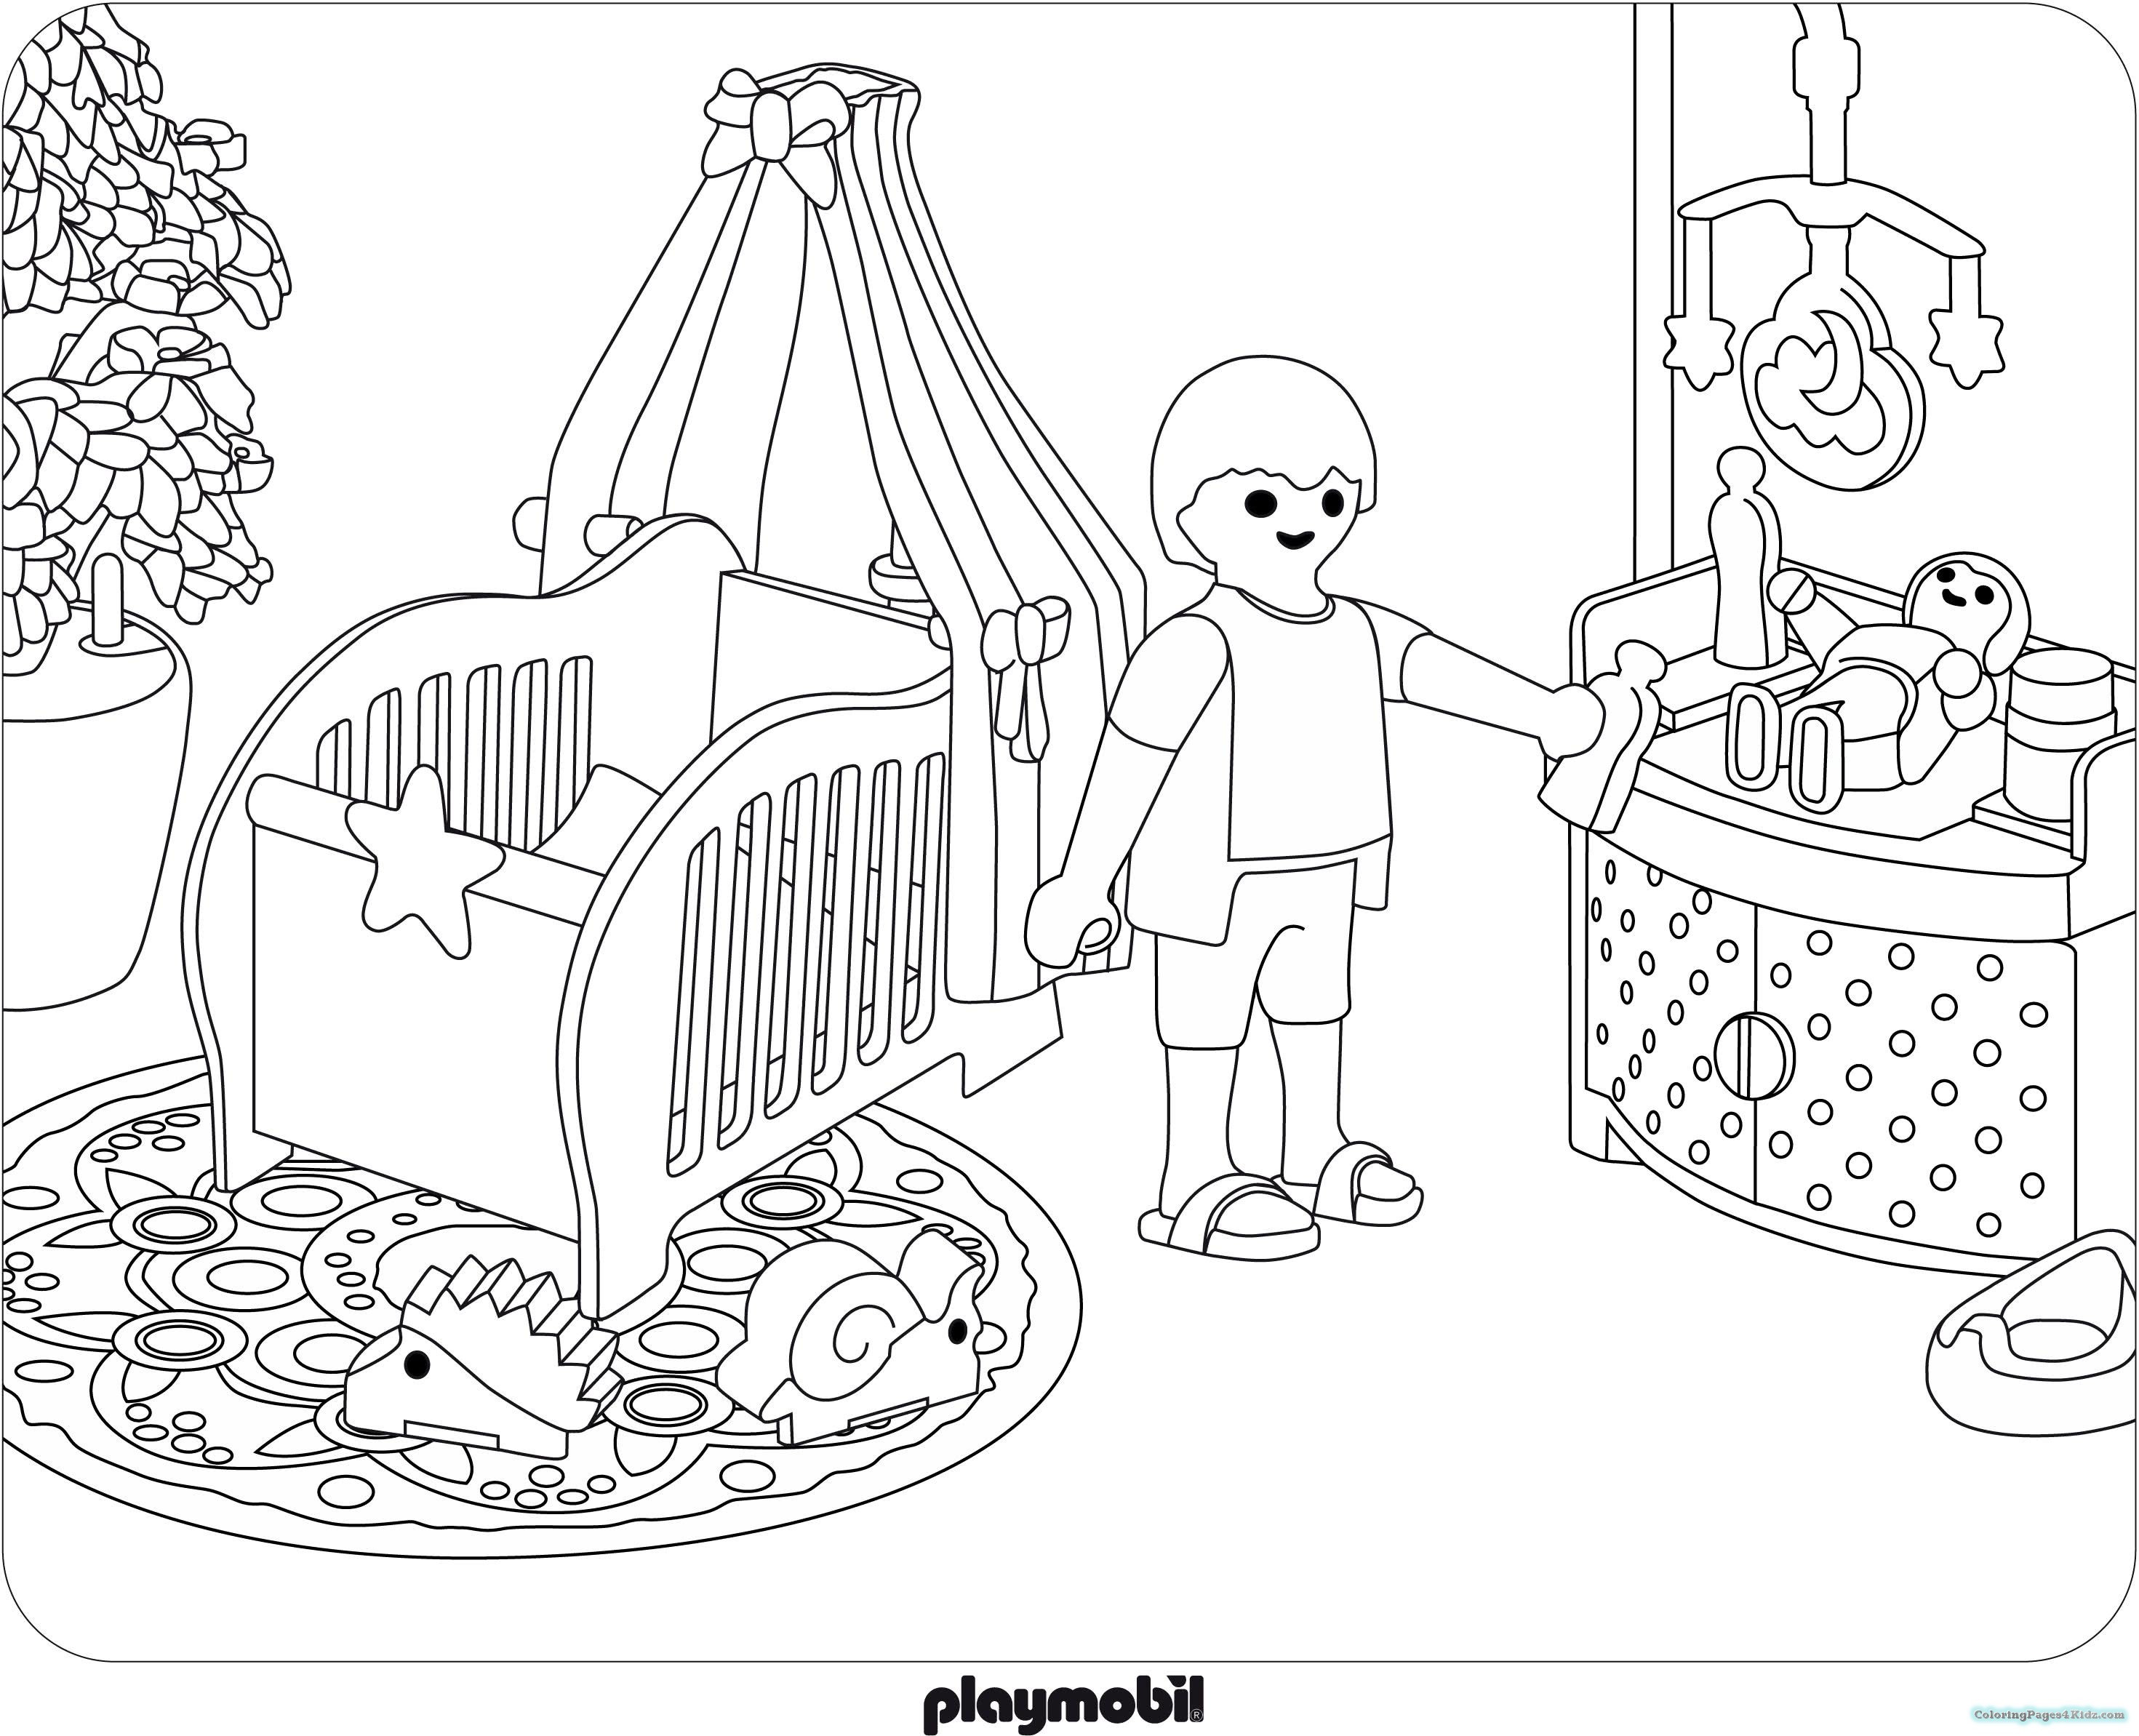 Coloring Sheets Free
 Dragon Playmobil Coloring Pages